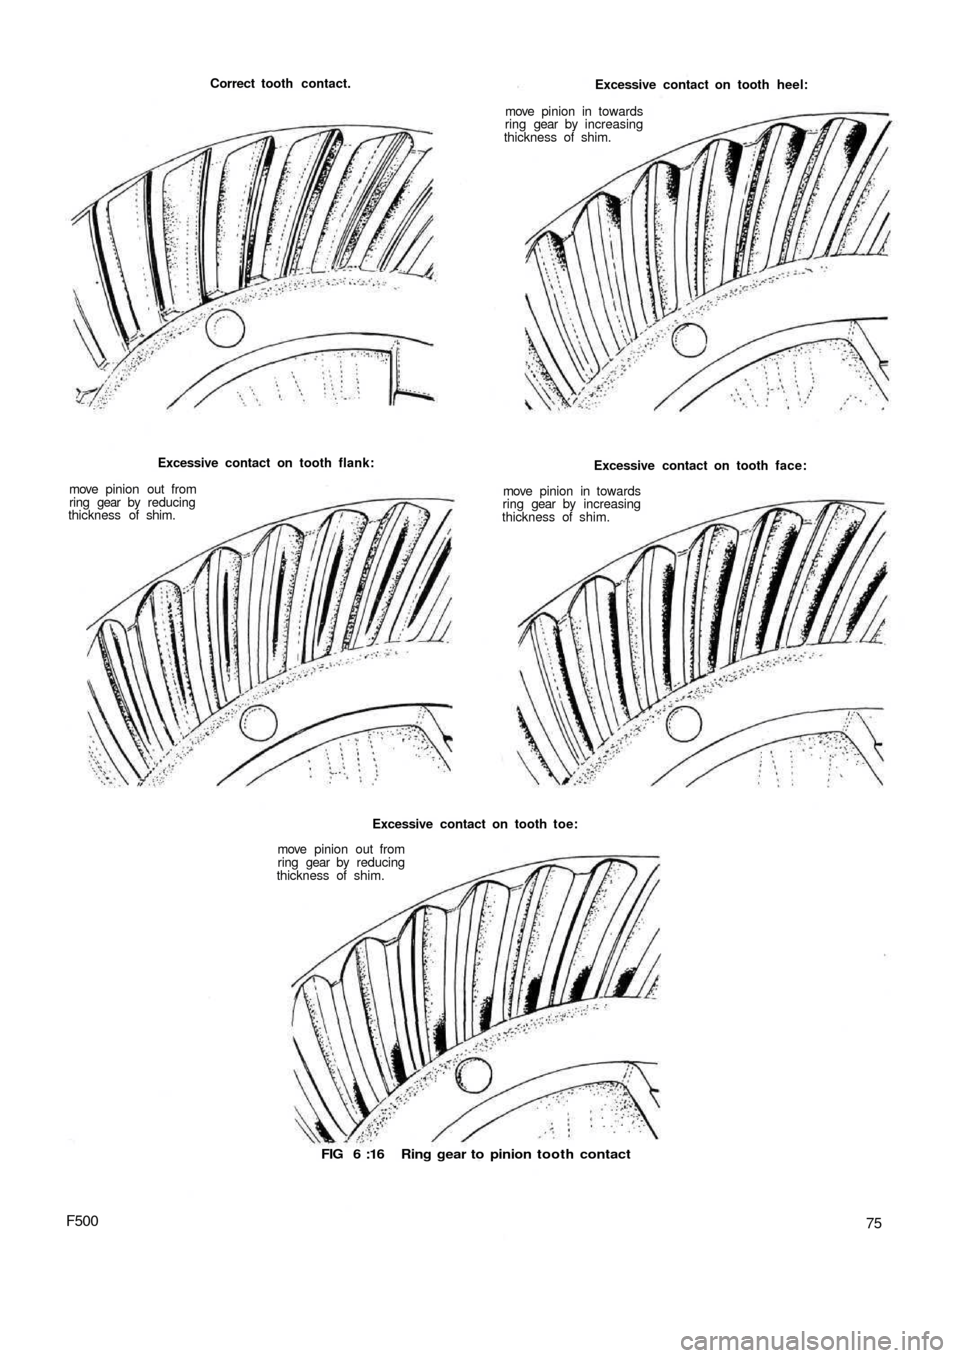 FIAT 500 1969 1.G Repair Manual Correct tooth contact.
Excessive contact on tooth flank:
move  pinion out from
ring gear  by  reducing
thickness of shim.
Excessive contact on tooth toe:
move  pinion out from
ring gear by reducing
th